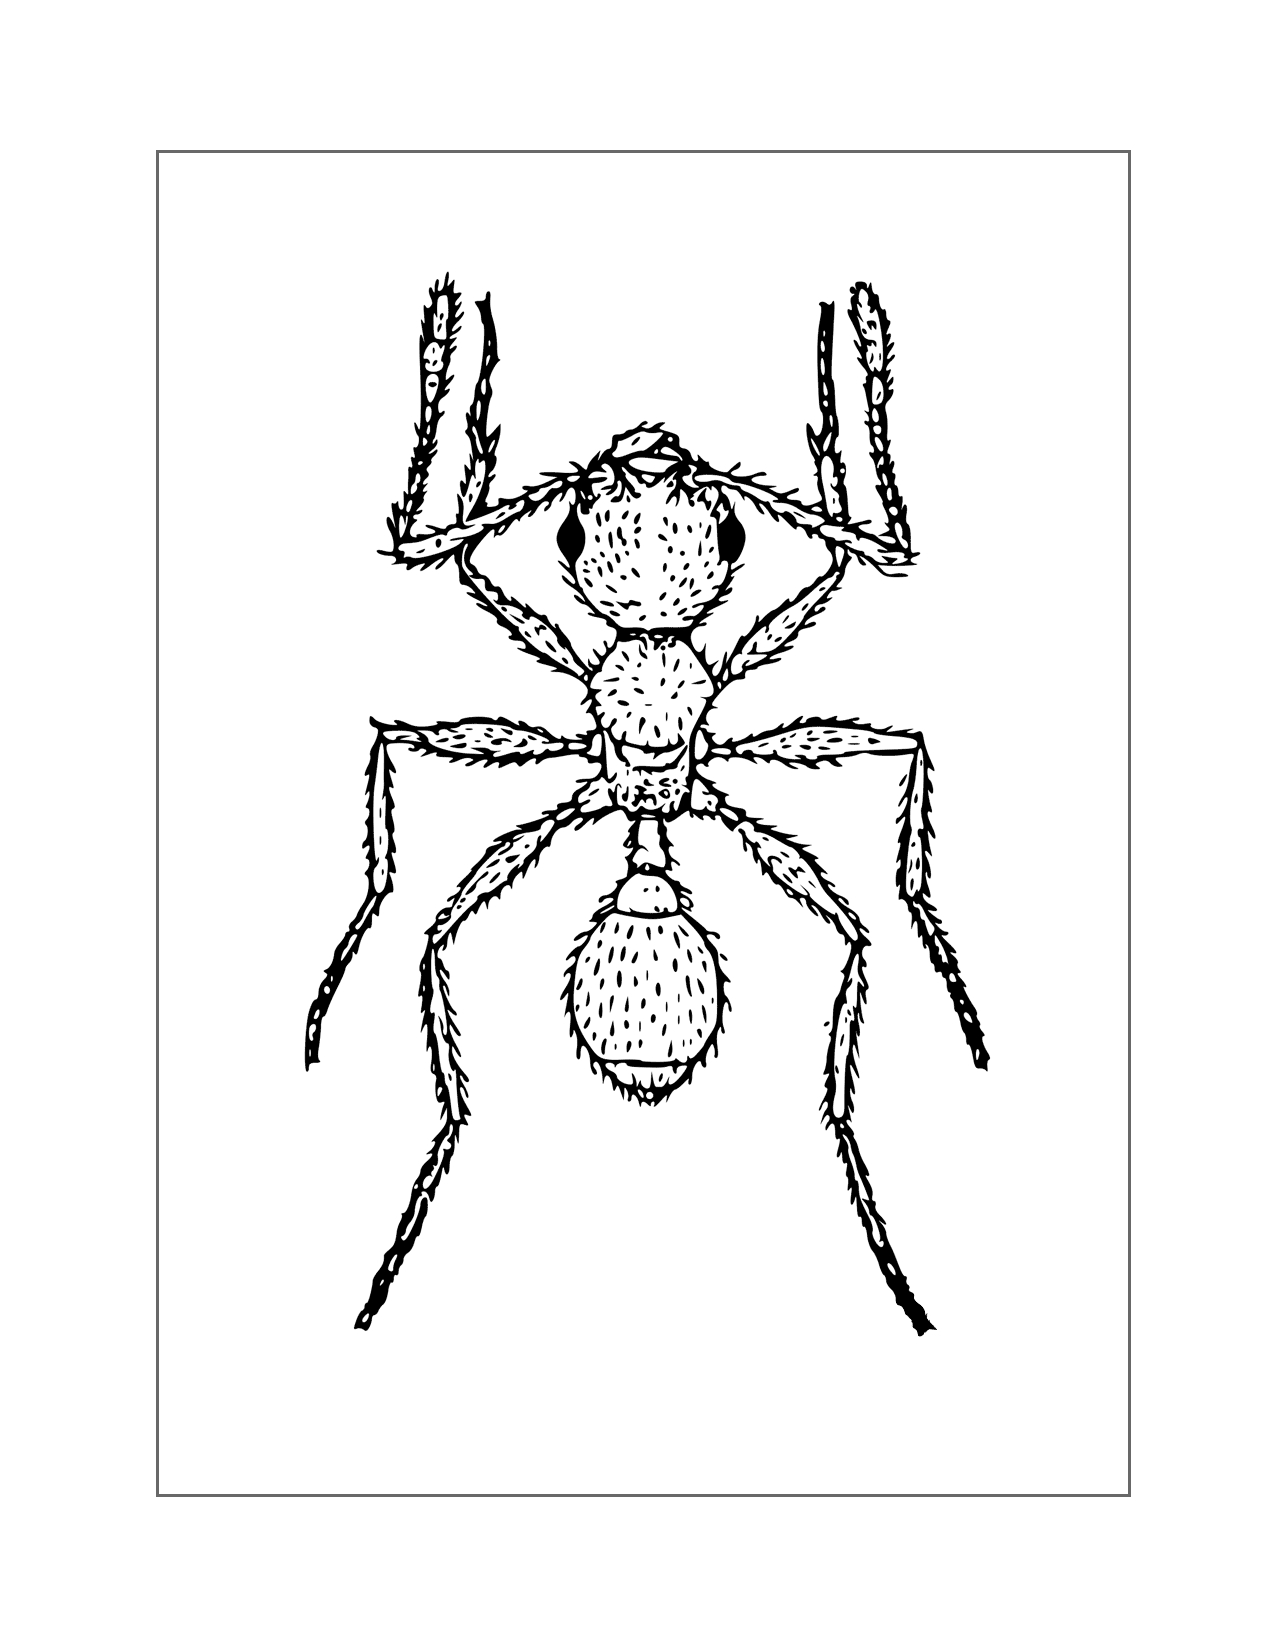 Ant Illustration Coloring Page